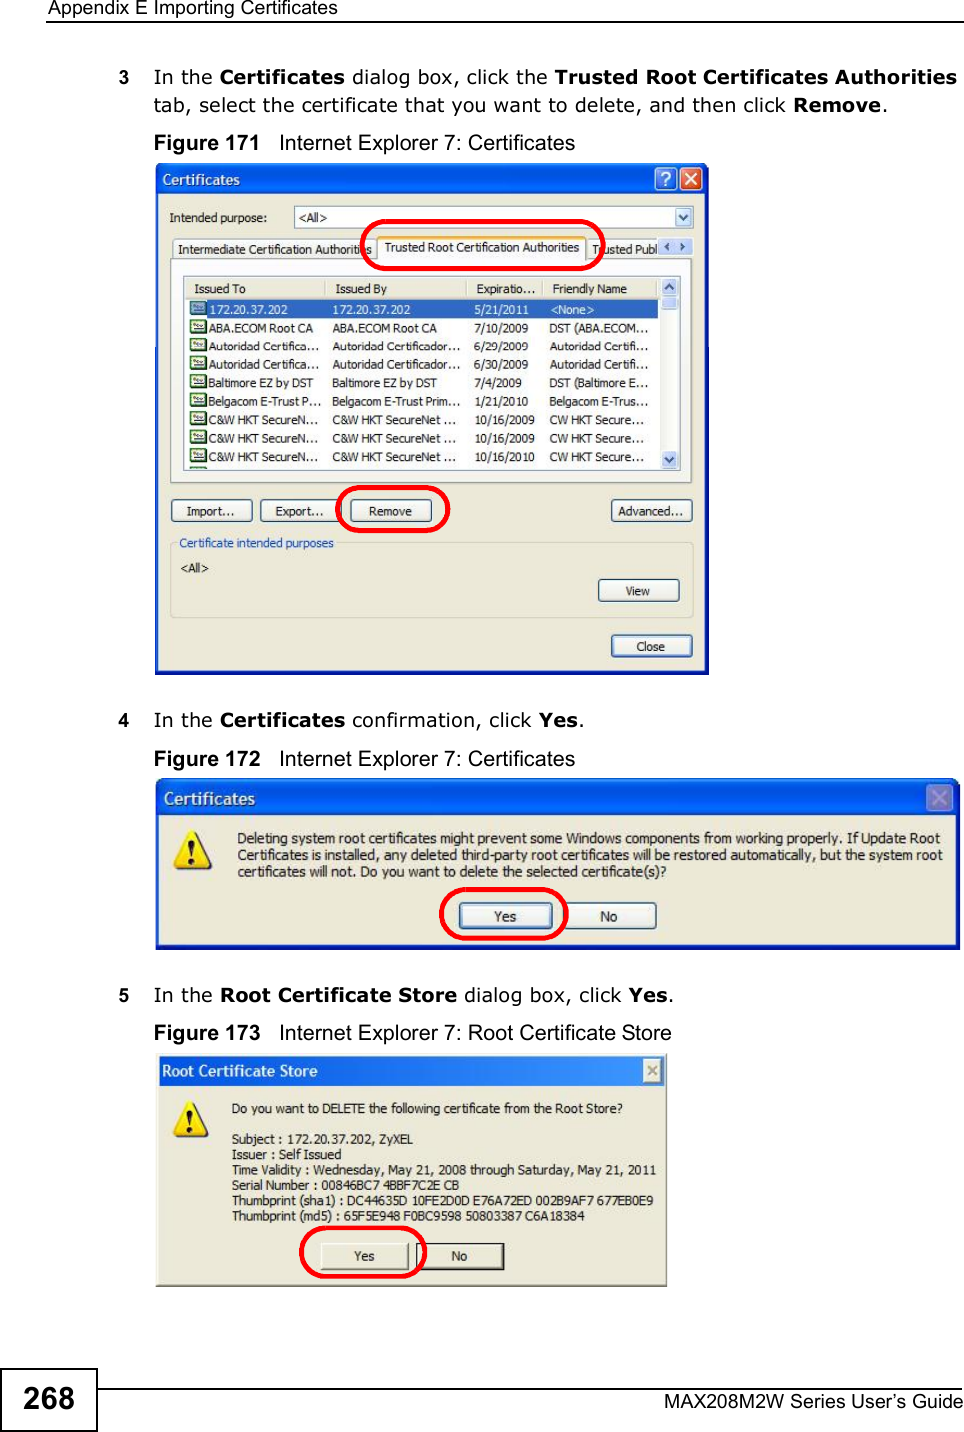 Appendix EImporting CertificatesMAX208M2W Series User s Guide2683In the Certificates dialog box, click the Trusted Root Certificates Authorities tab, select the certificate that you want to delete, and then click Remove.Figure 171   Internet Explorer 7: Certificates4In the Certificates confirmation, click Yes.Figure 172   Internet Explorer 7: Certificates5In the Root Certificate Store dialog box, click Yes.Figure 173   Internet Explorer 7: Root Certificate Store